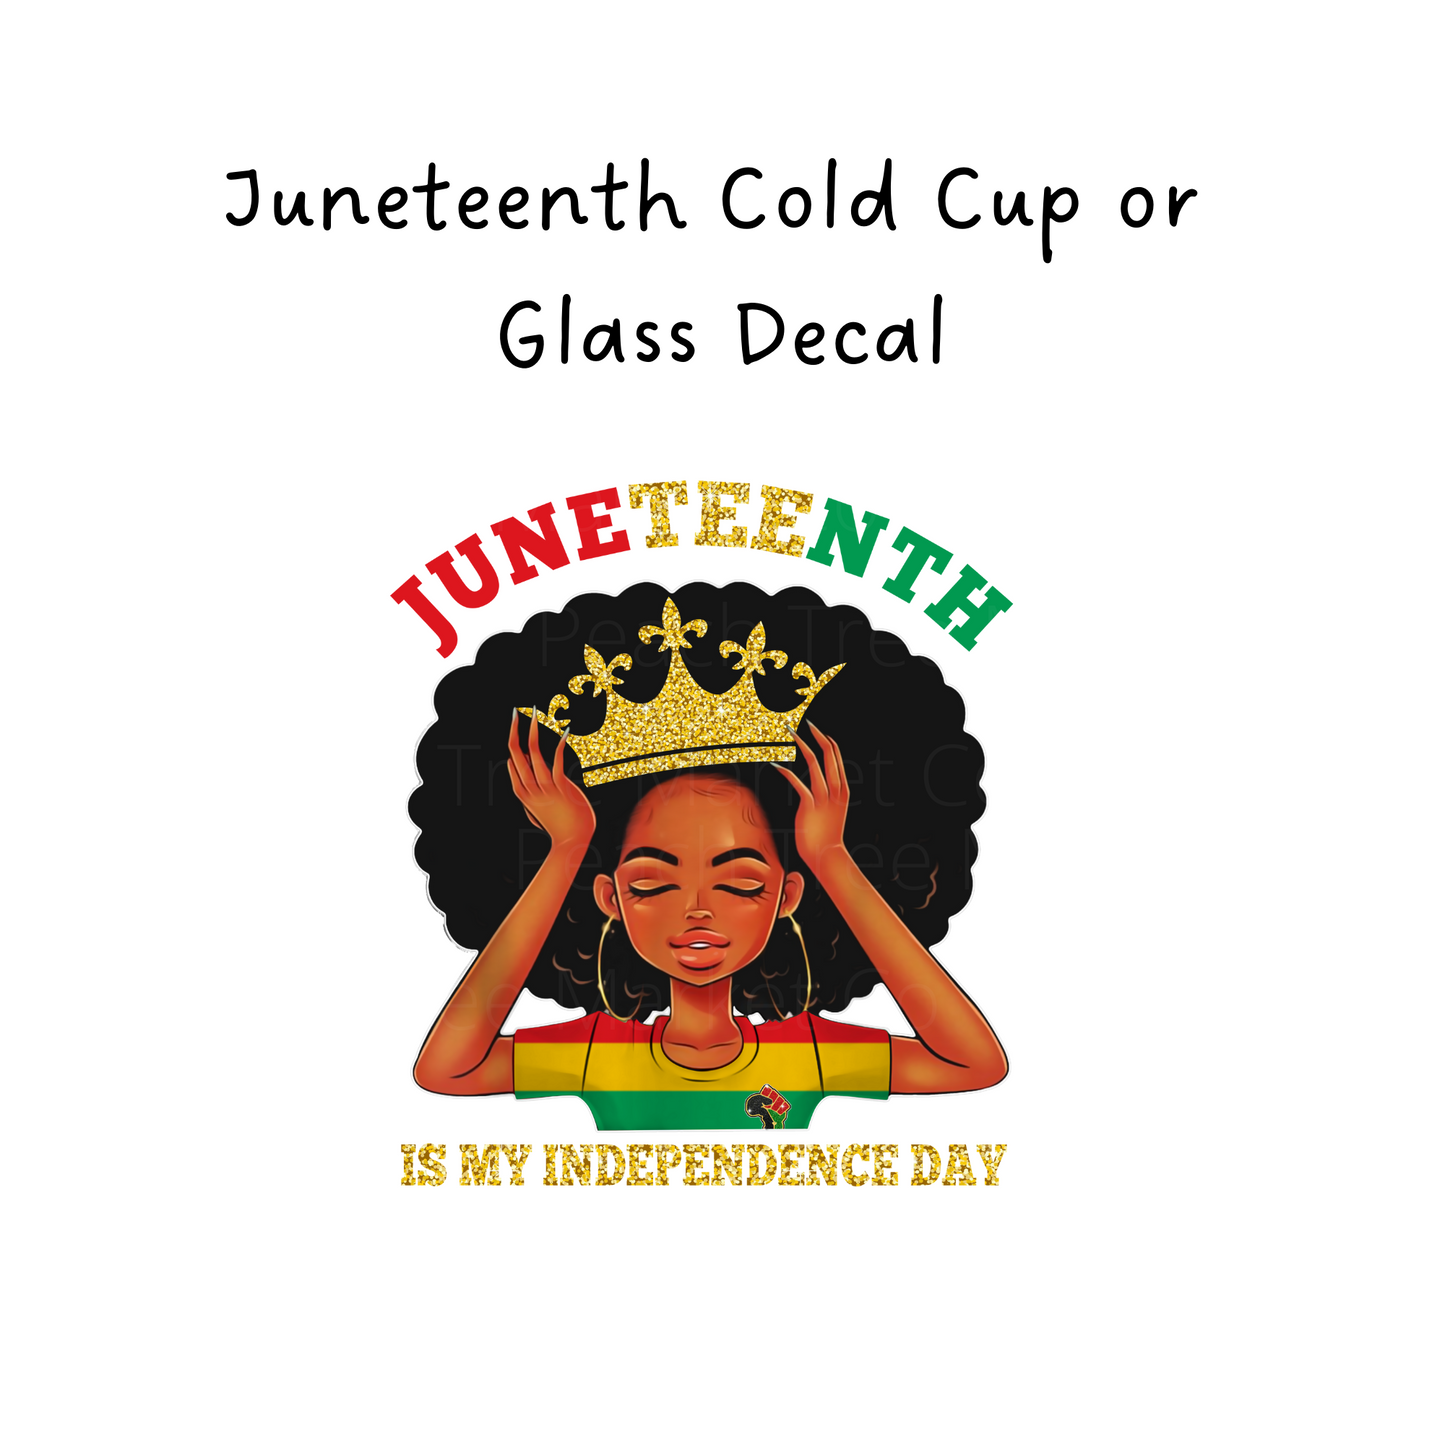 Juneteenth Cold Cup or Glass Decal